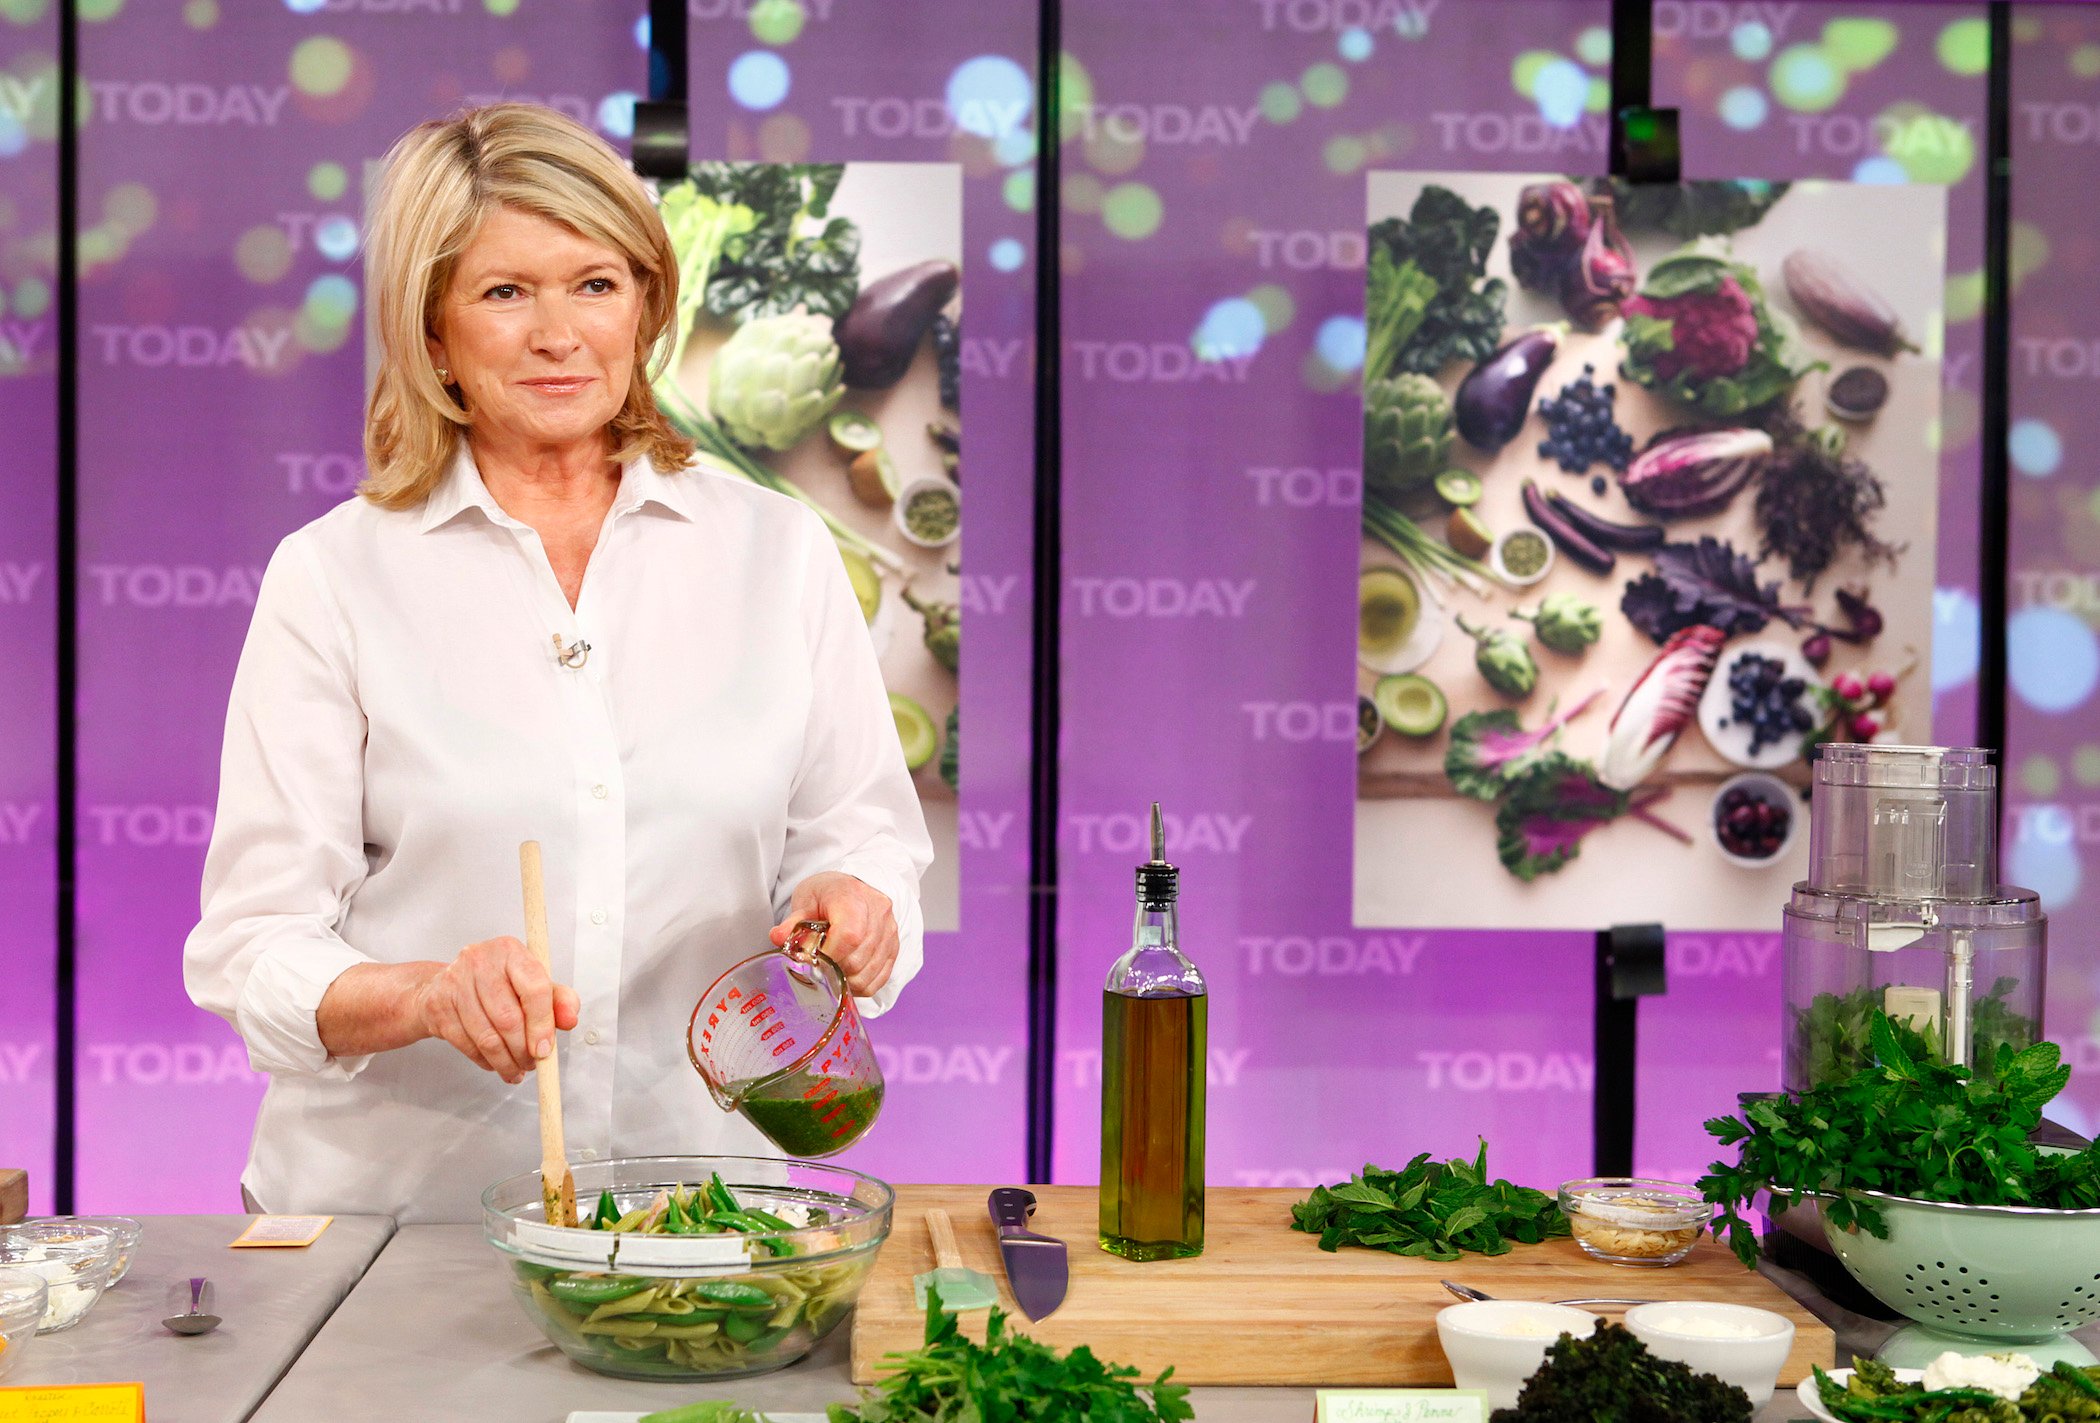 Martha Stewart cooking on NBC News' 'Today' show 